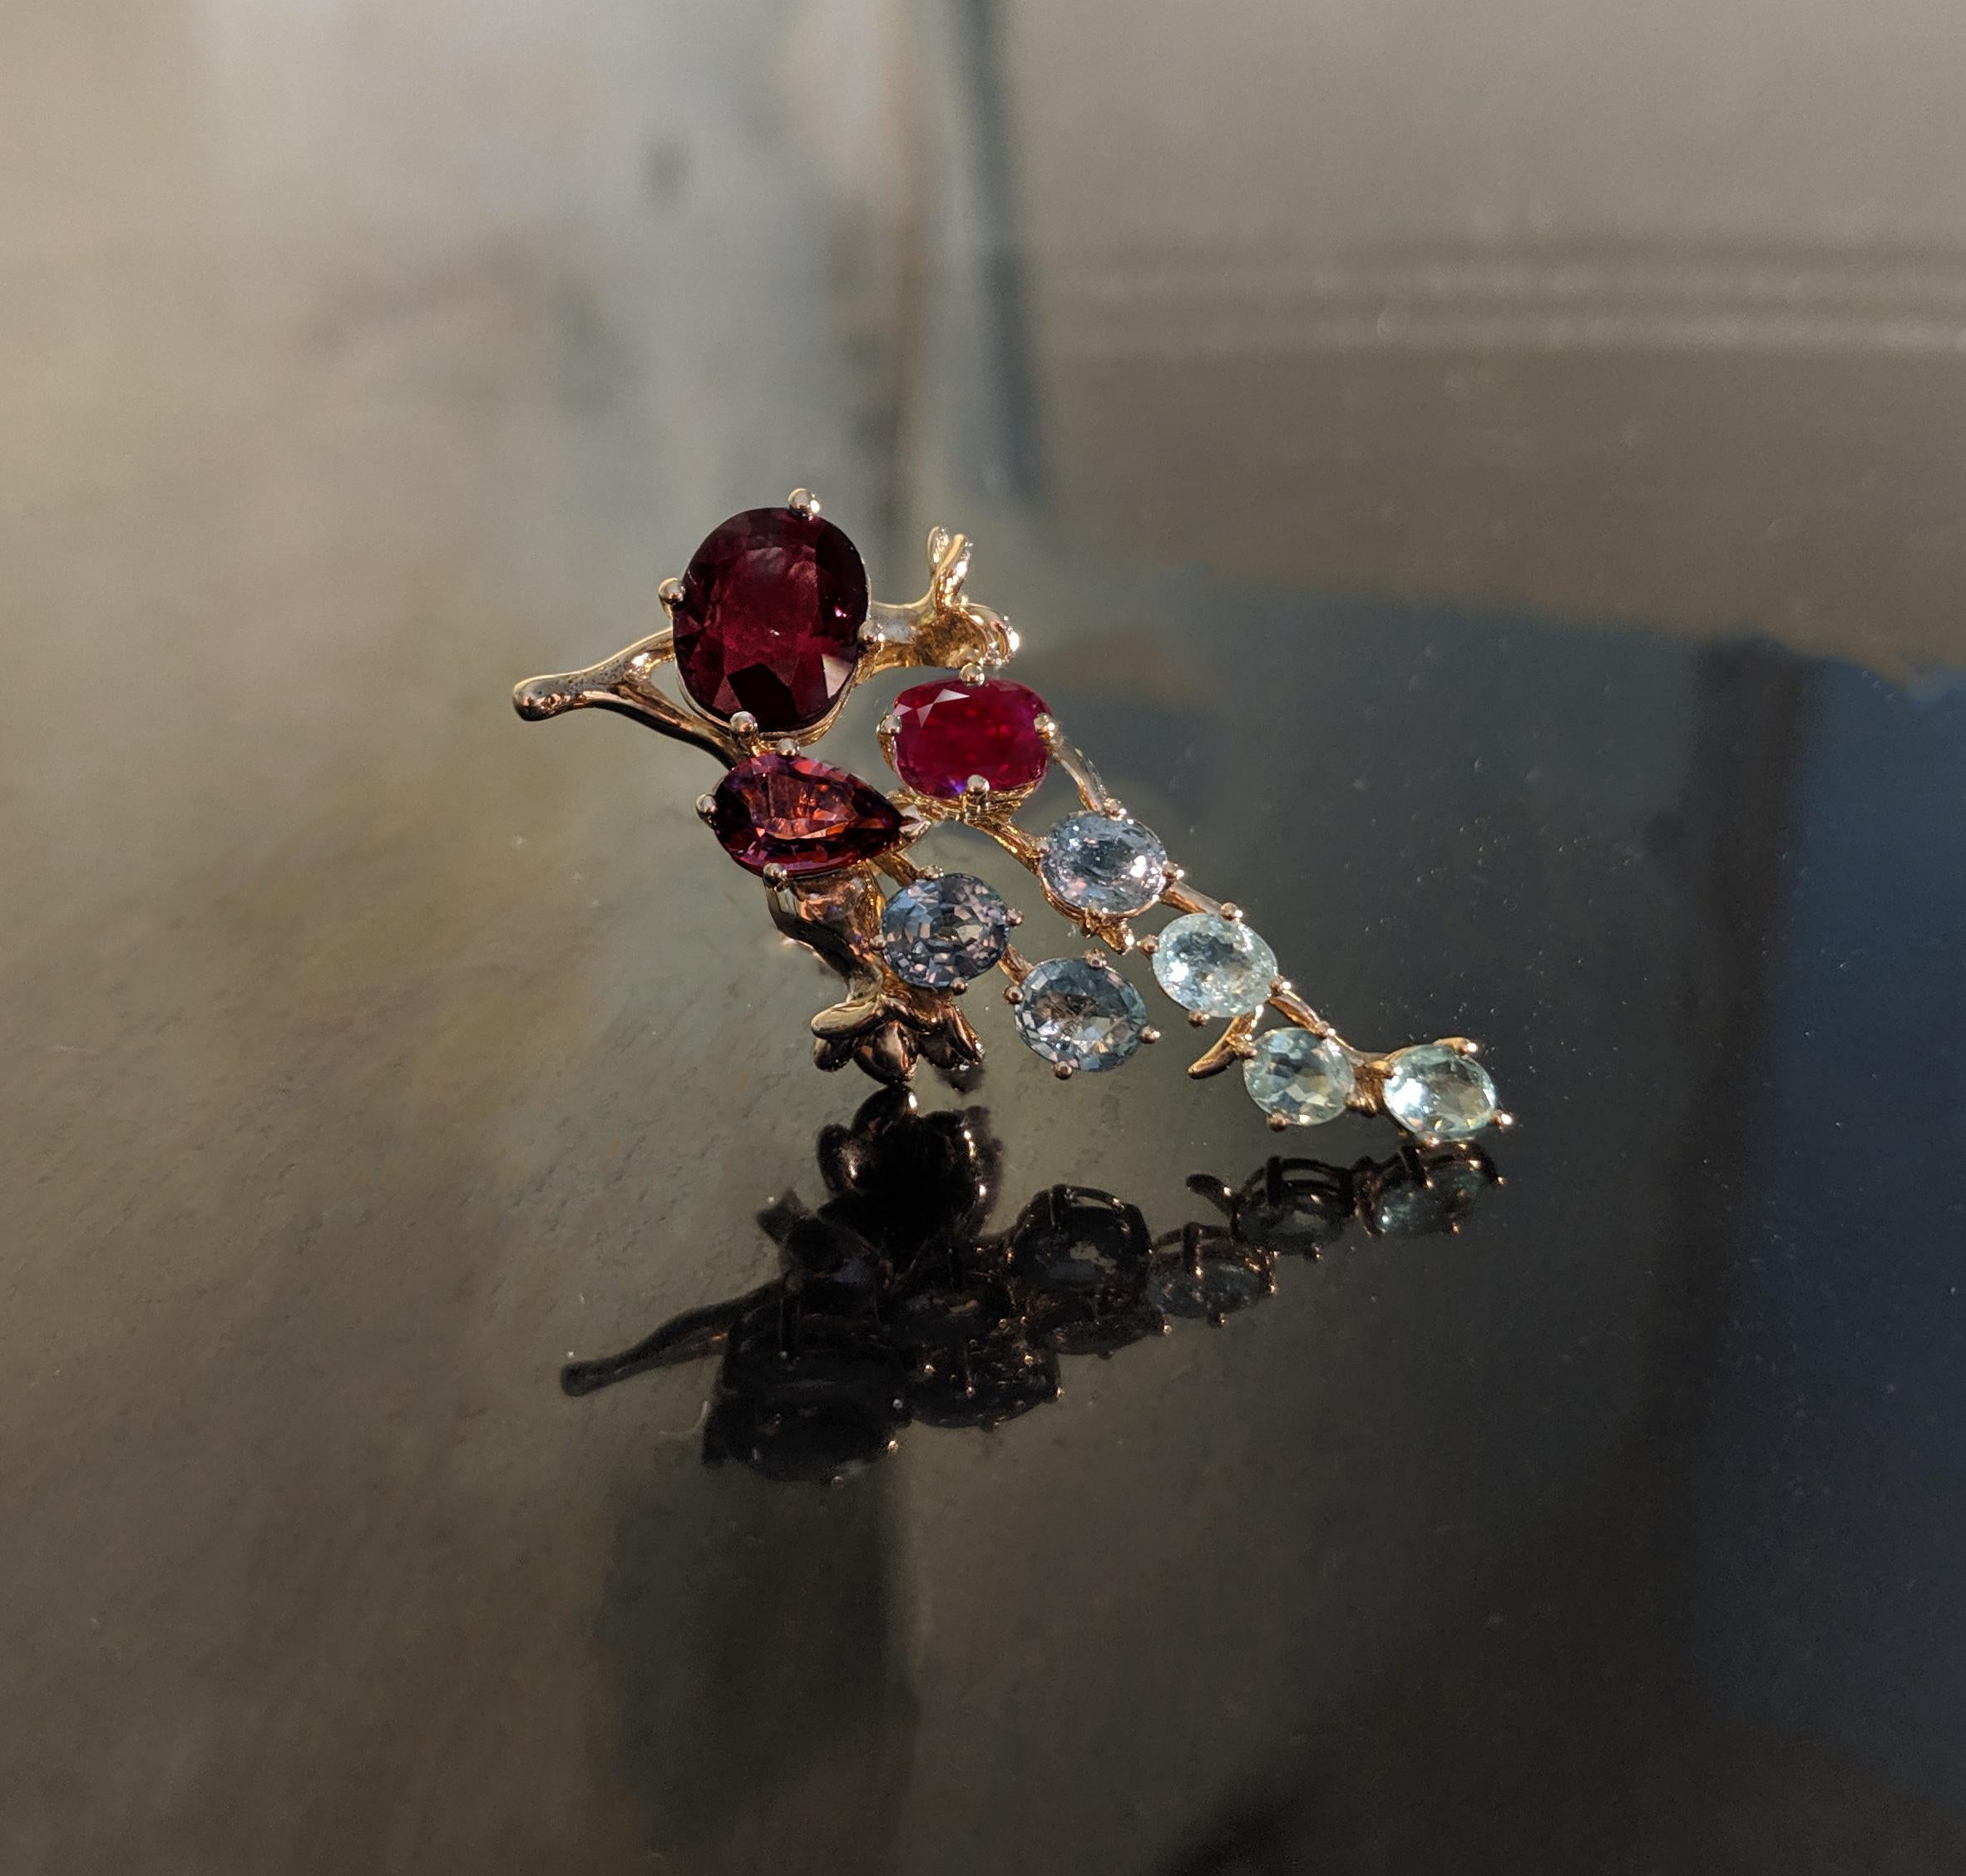 This Tobacco Flower contemporary brooch is made of  18 karat yellow gold.
The natural gems are:
Oval ruby 4,27 carats, dimension: 11,16x9,36 mm.
Oval cold red sapphire, 0,95 carats.
Pear cut cold malaya garnet, 1,25 carats.
Green oval cut sapphire,